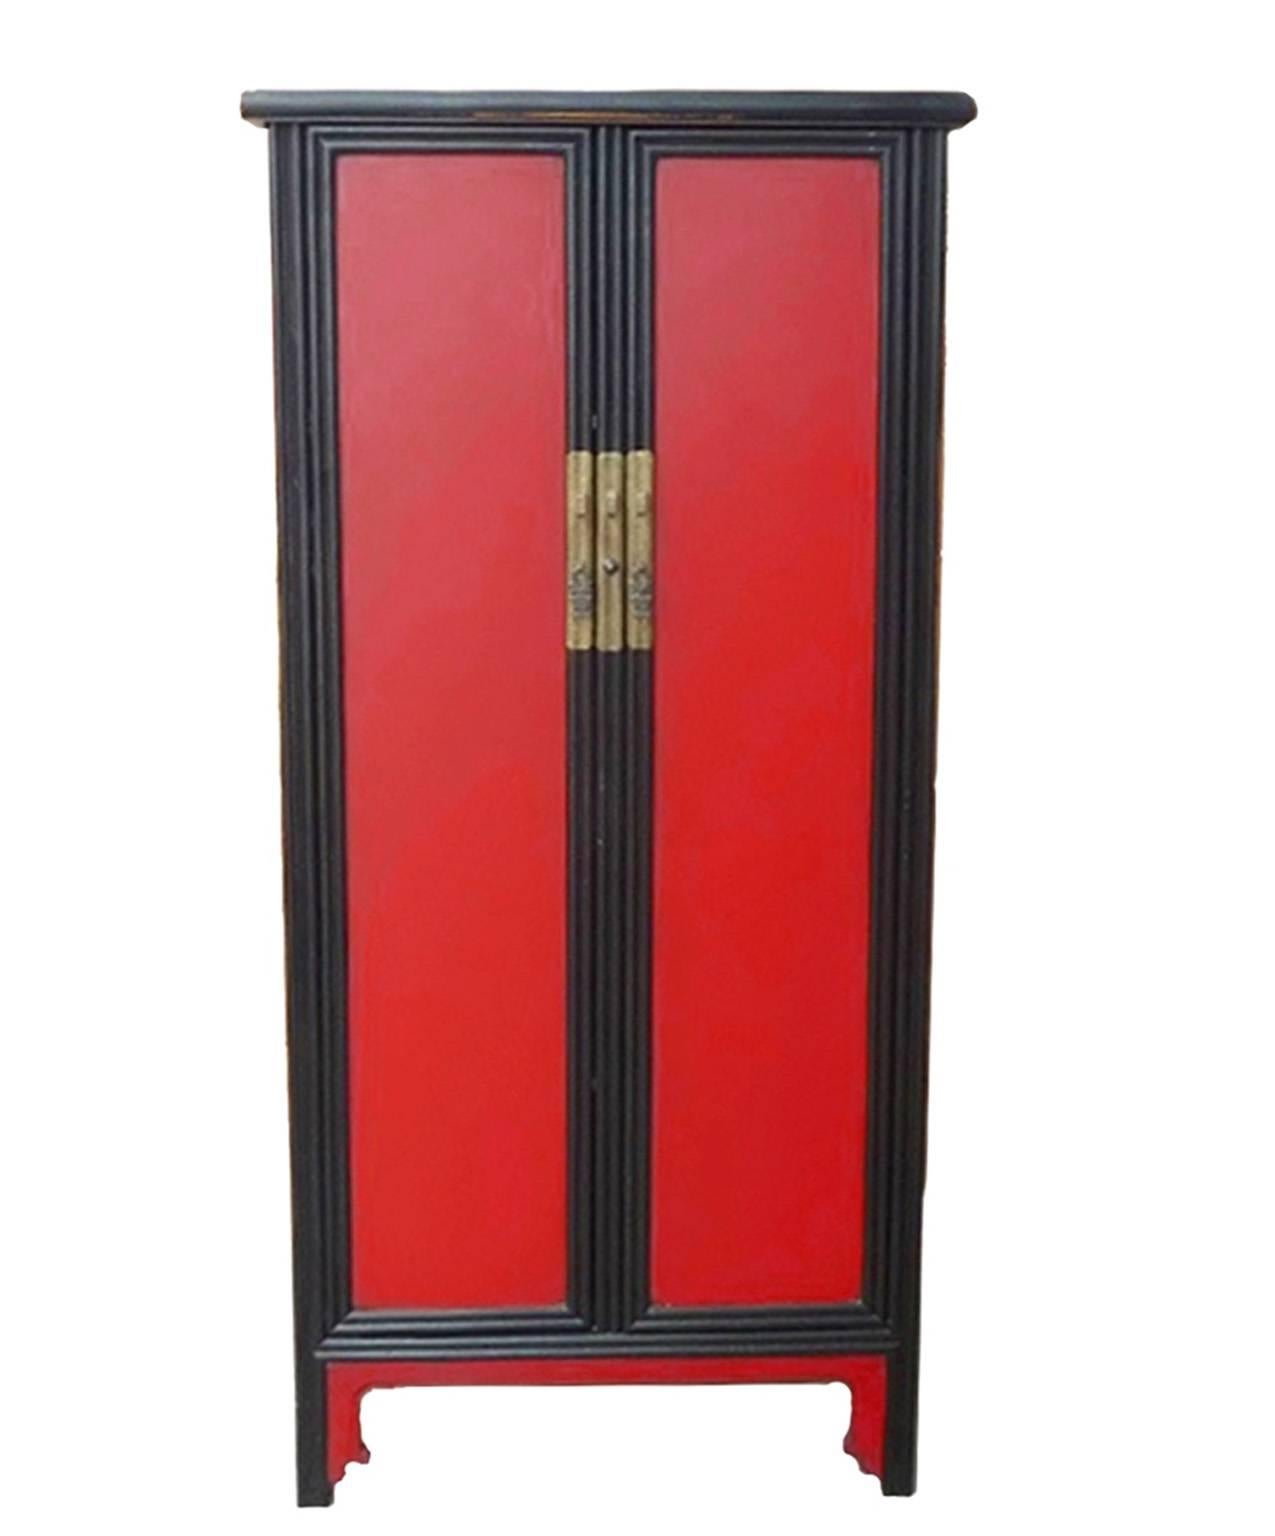 Incredible value! Price is for both cabinet and desk! This beautiful cabinet is a great new example of Ming Dynasty's simple and elegant design in furniture making. Contrasting red and black color makes it a fantastic focal point. Removable center